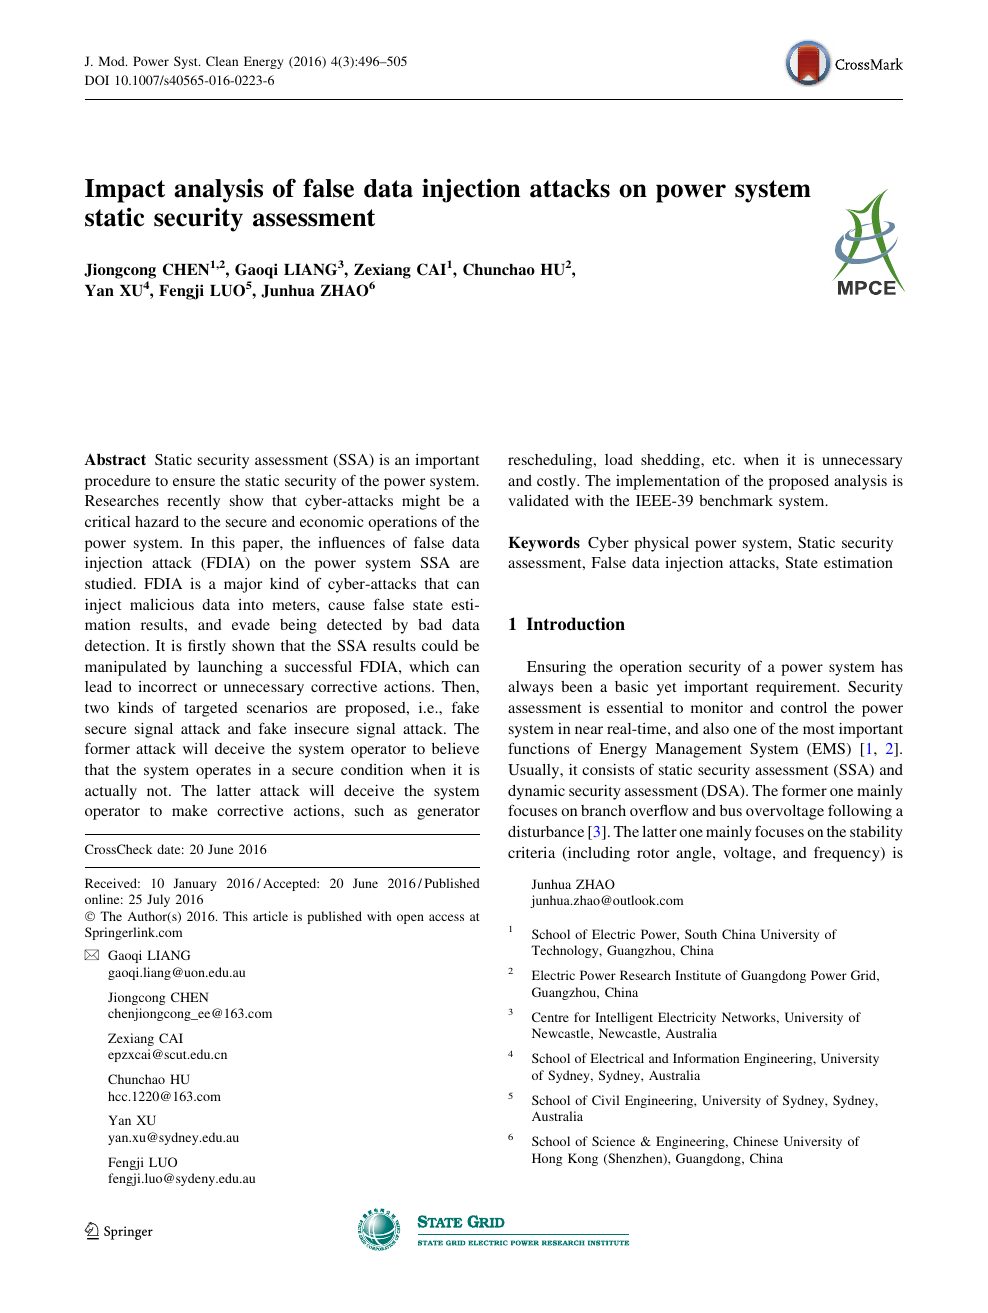 Impact Analysis Of False Data Injection Attacks On Power System Static Security Assessment Topic Of Research Paper In Electrical Engineering Electronic Engineering Information Engineering Download Scholarly Article Pdf And Read For